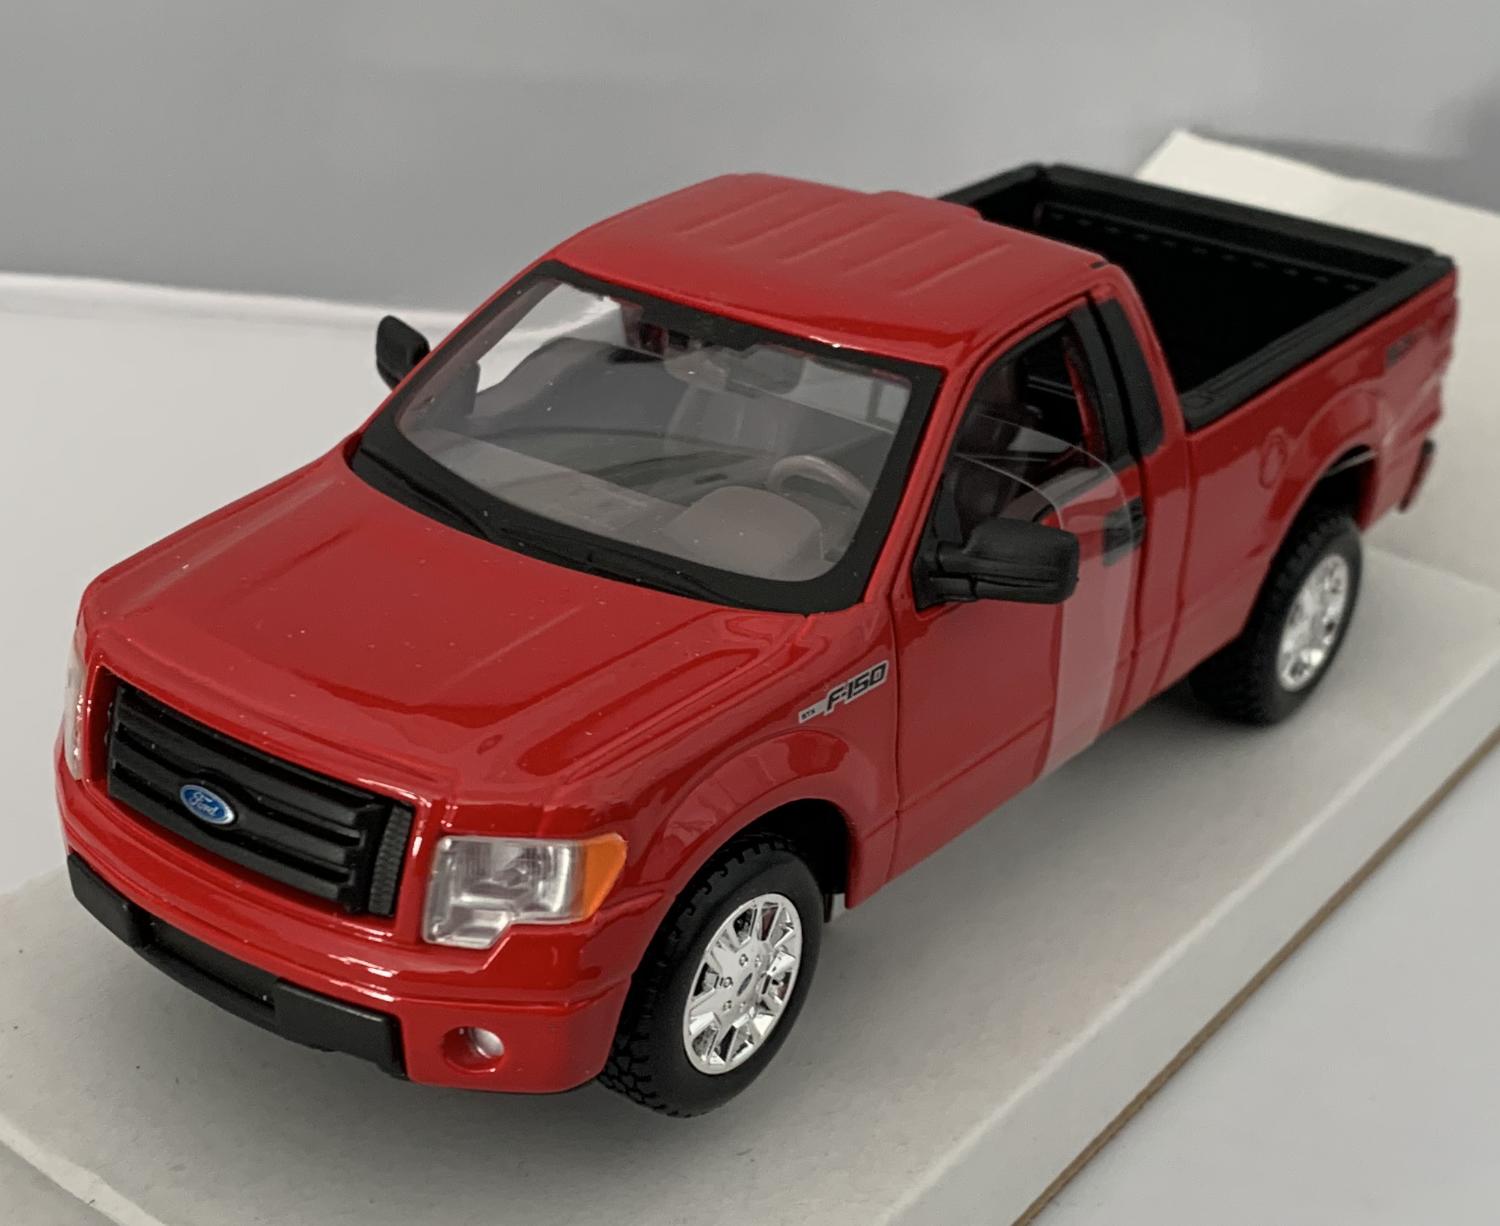 An excellent scale model of a Ford F-150 STX decorated in red with chrome wheels.